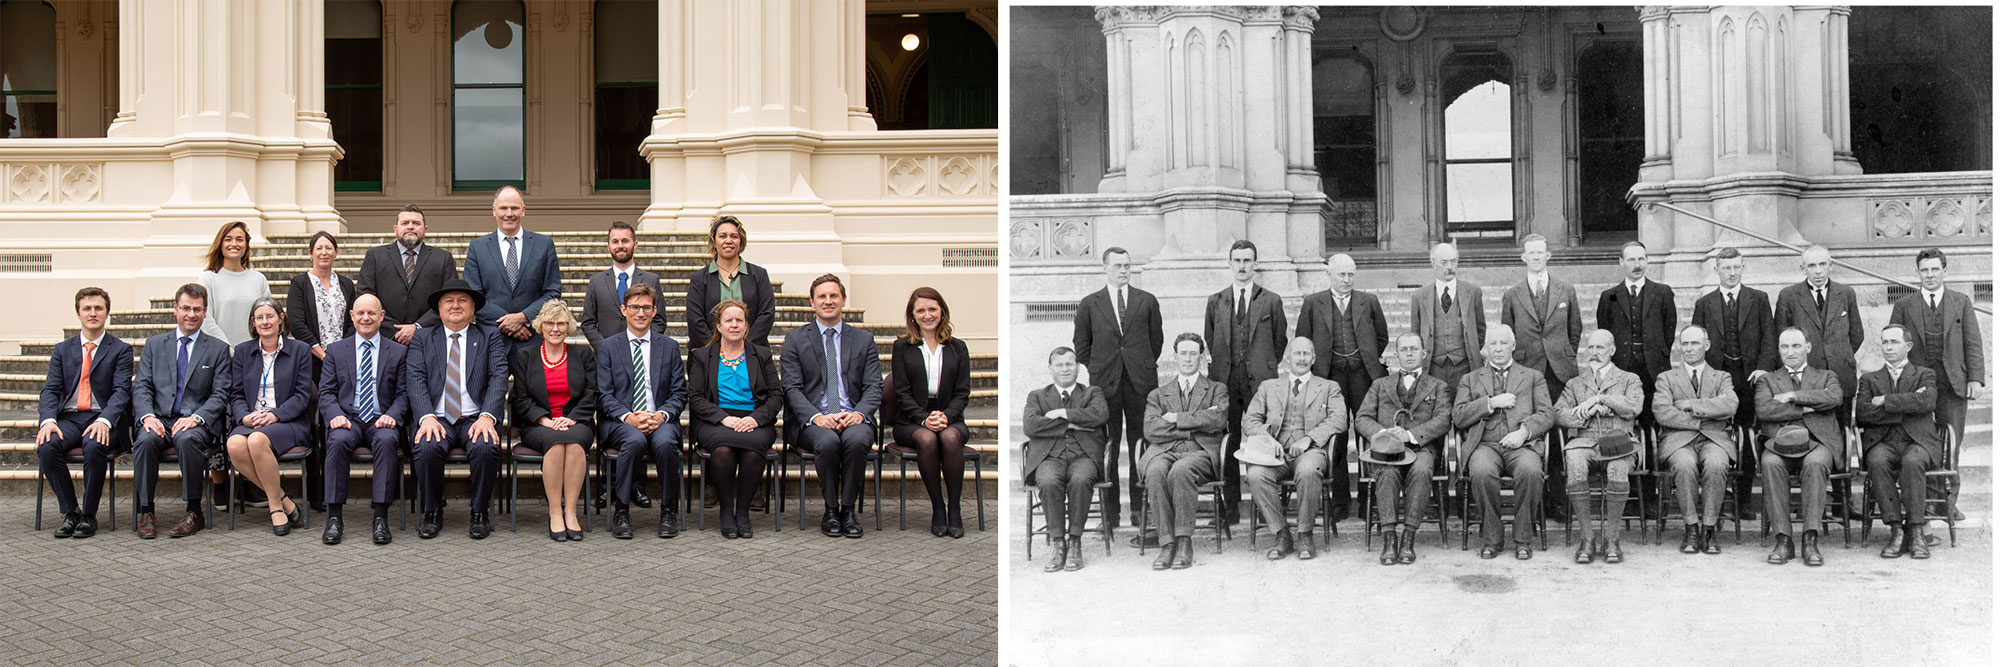 The 2019 forestry leadership team, photographed on the Parliamentary library steps, alongside a photo of the original State Forest Service leadership team which was taken in 1921.